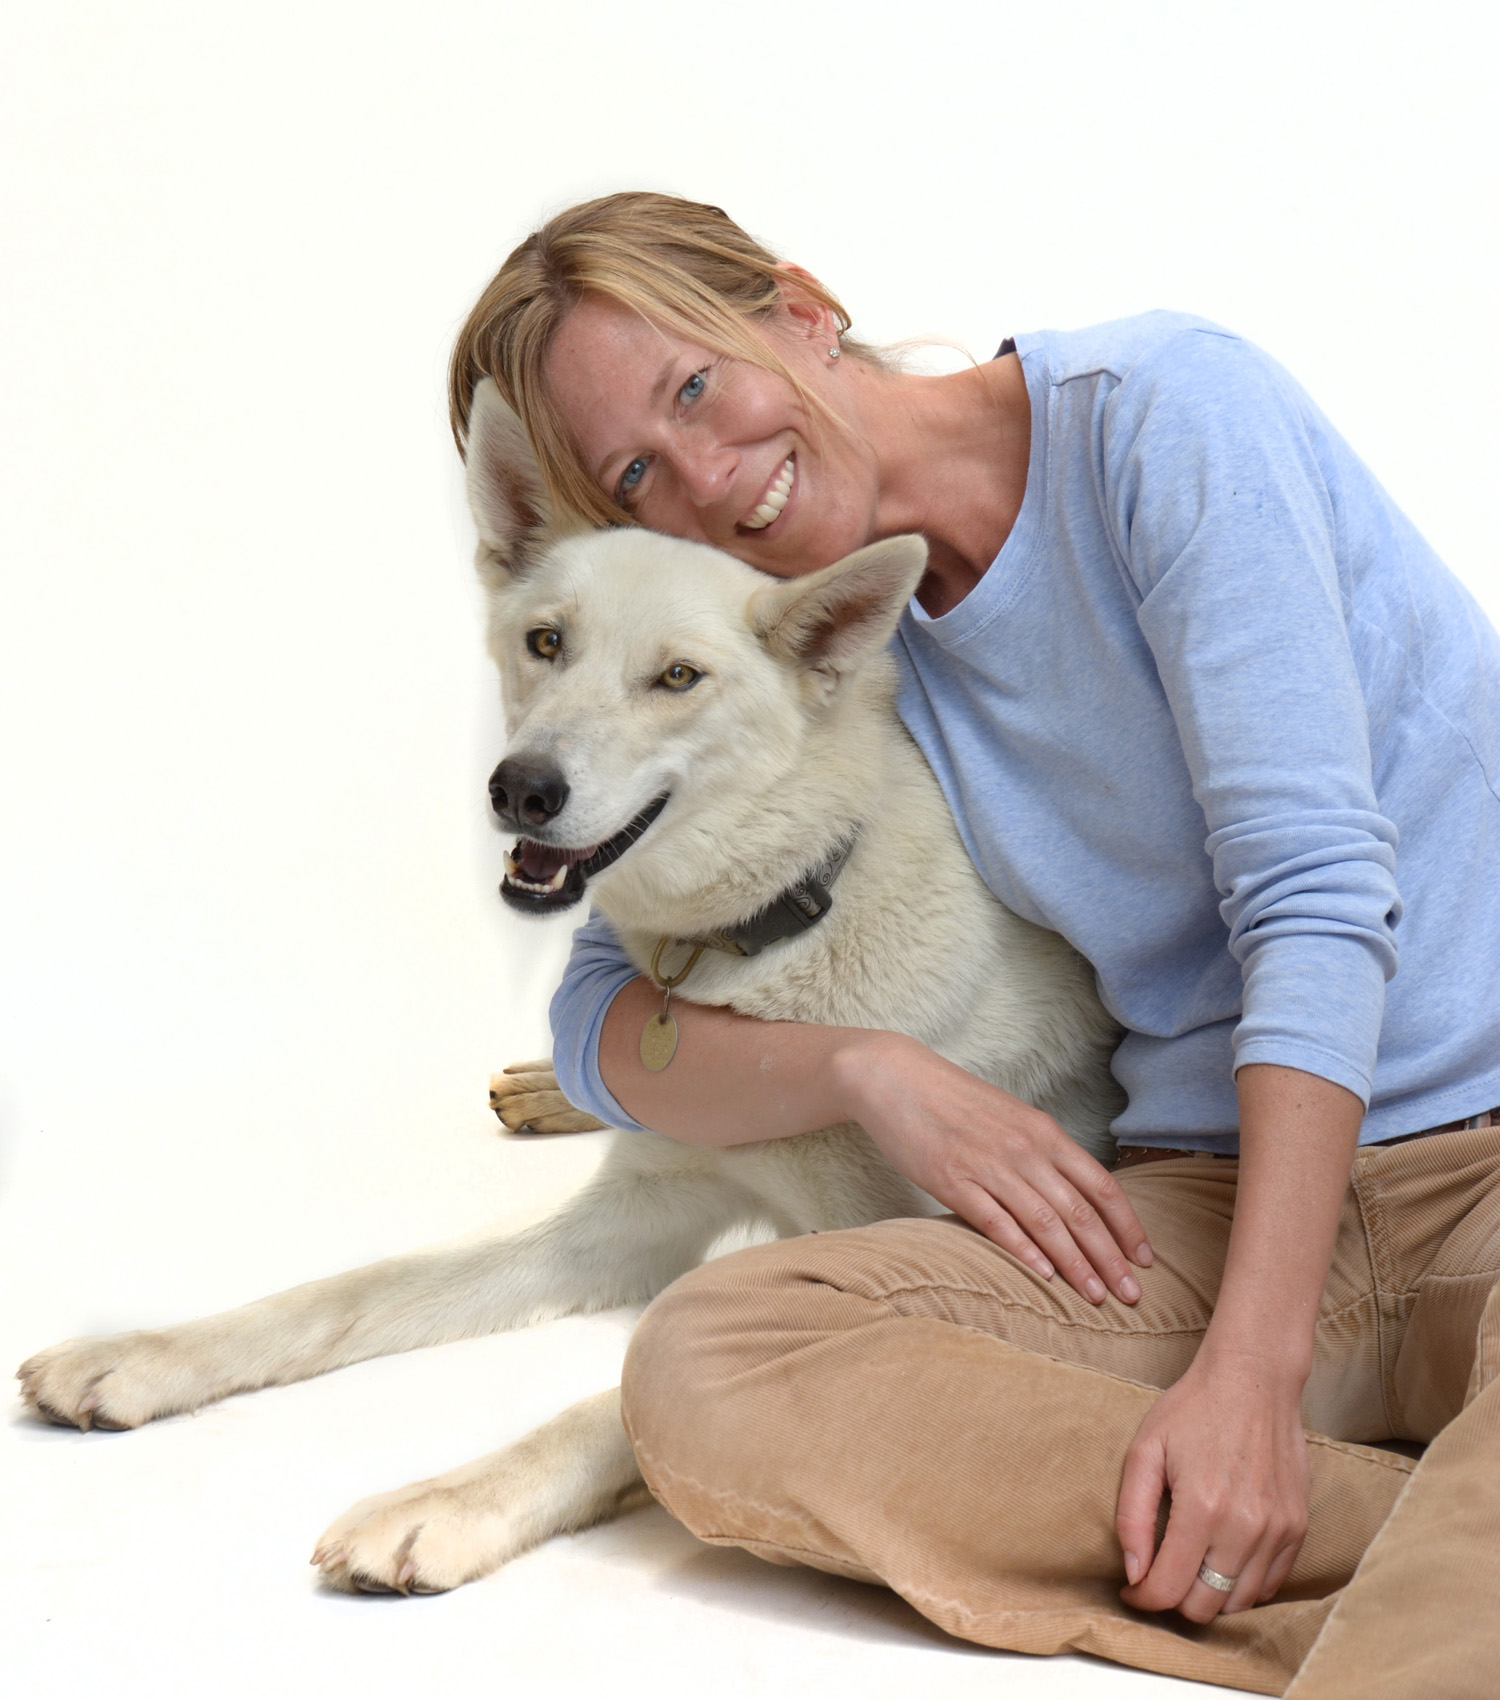 Author Dagny McKinley and her dog, Alma Rose